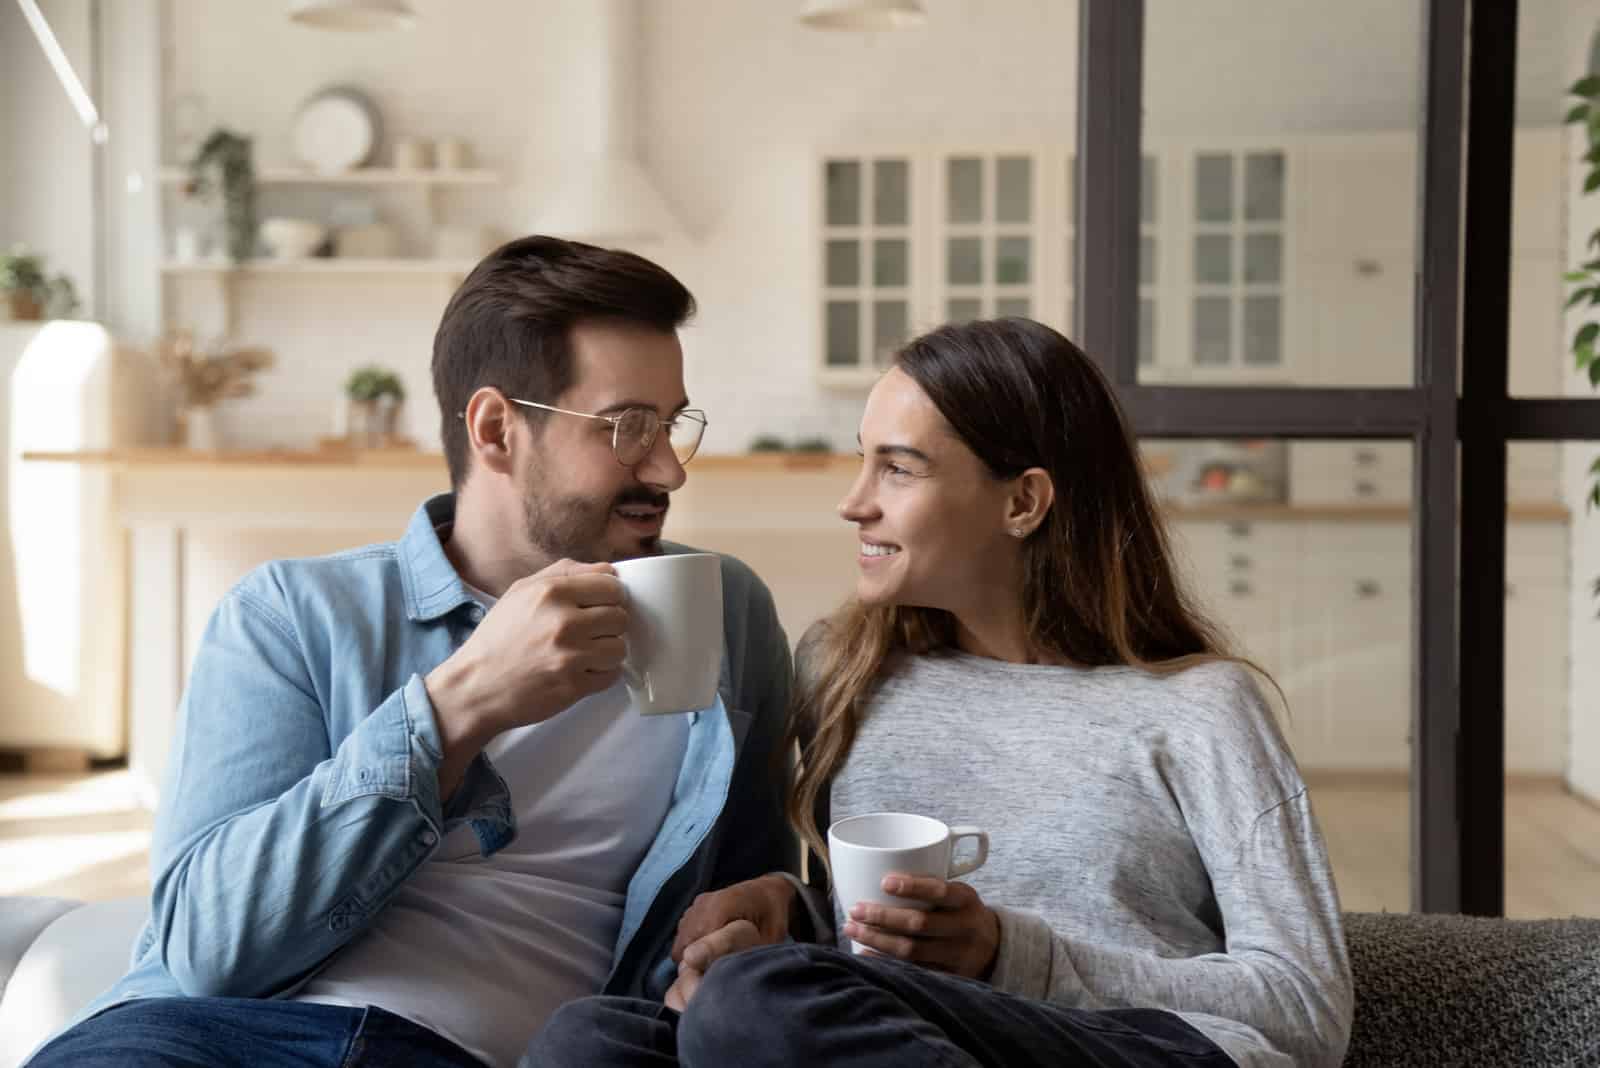 a smiling man and woman sit on the couch and talk over coffee